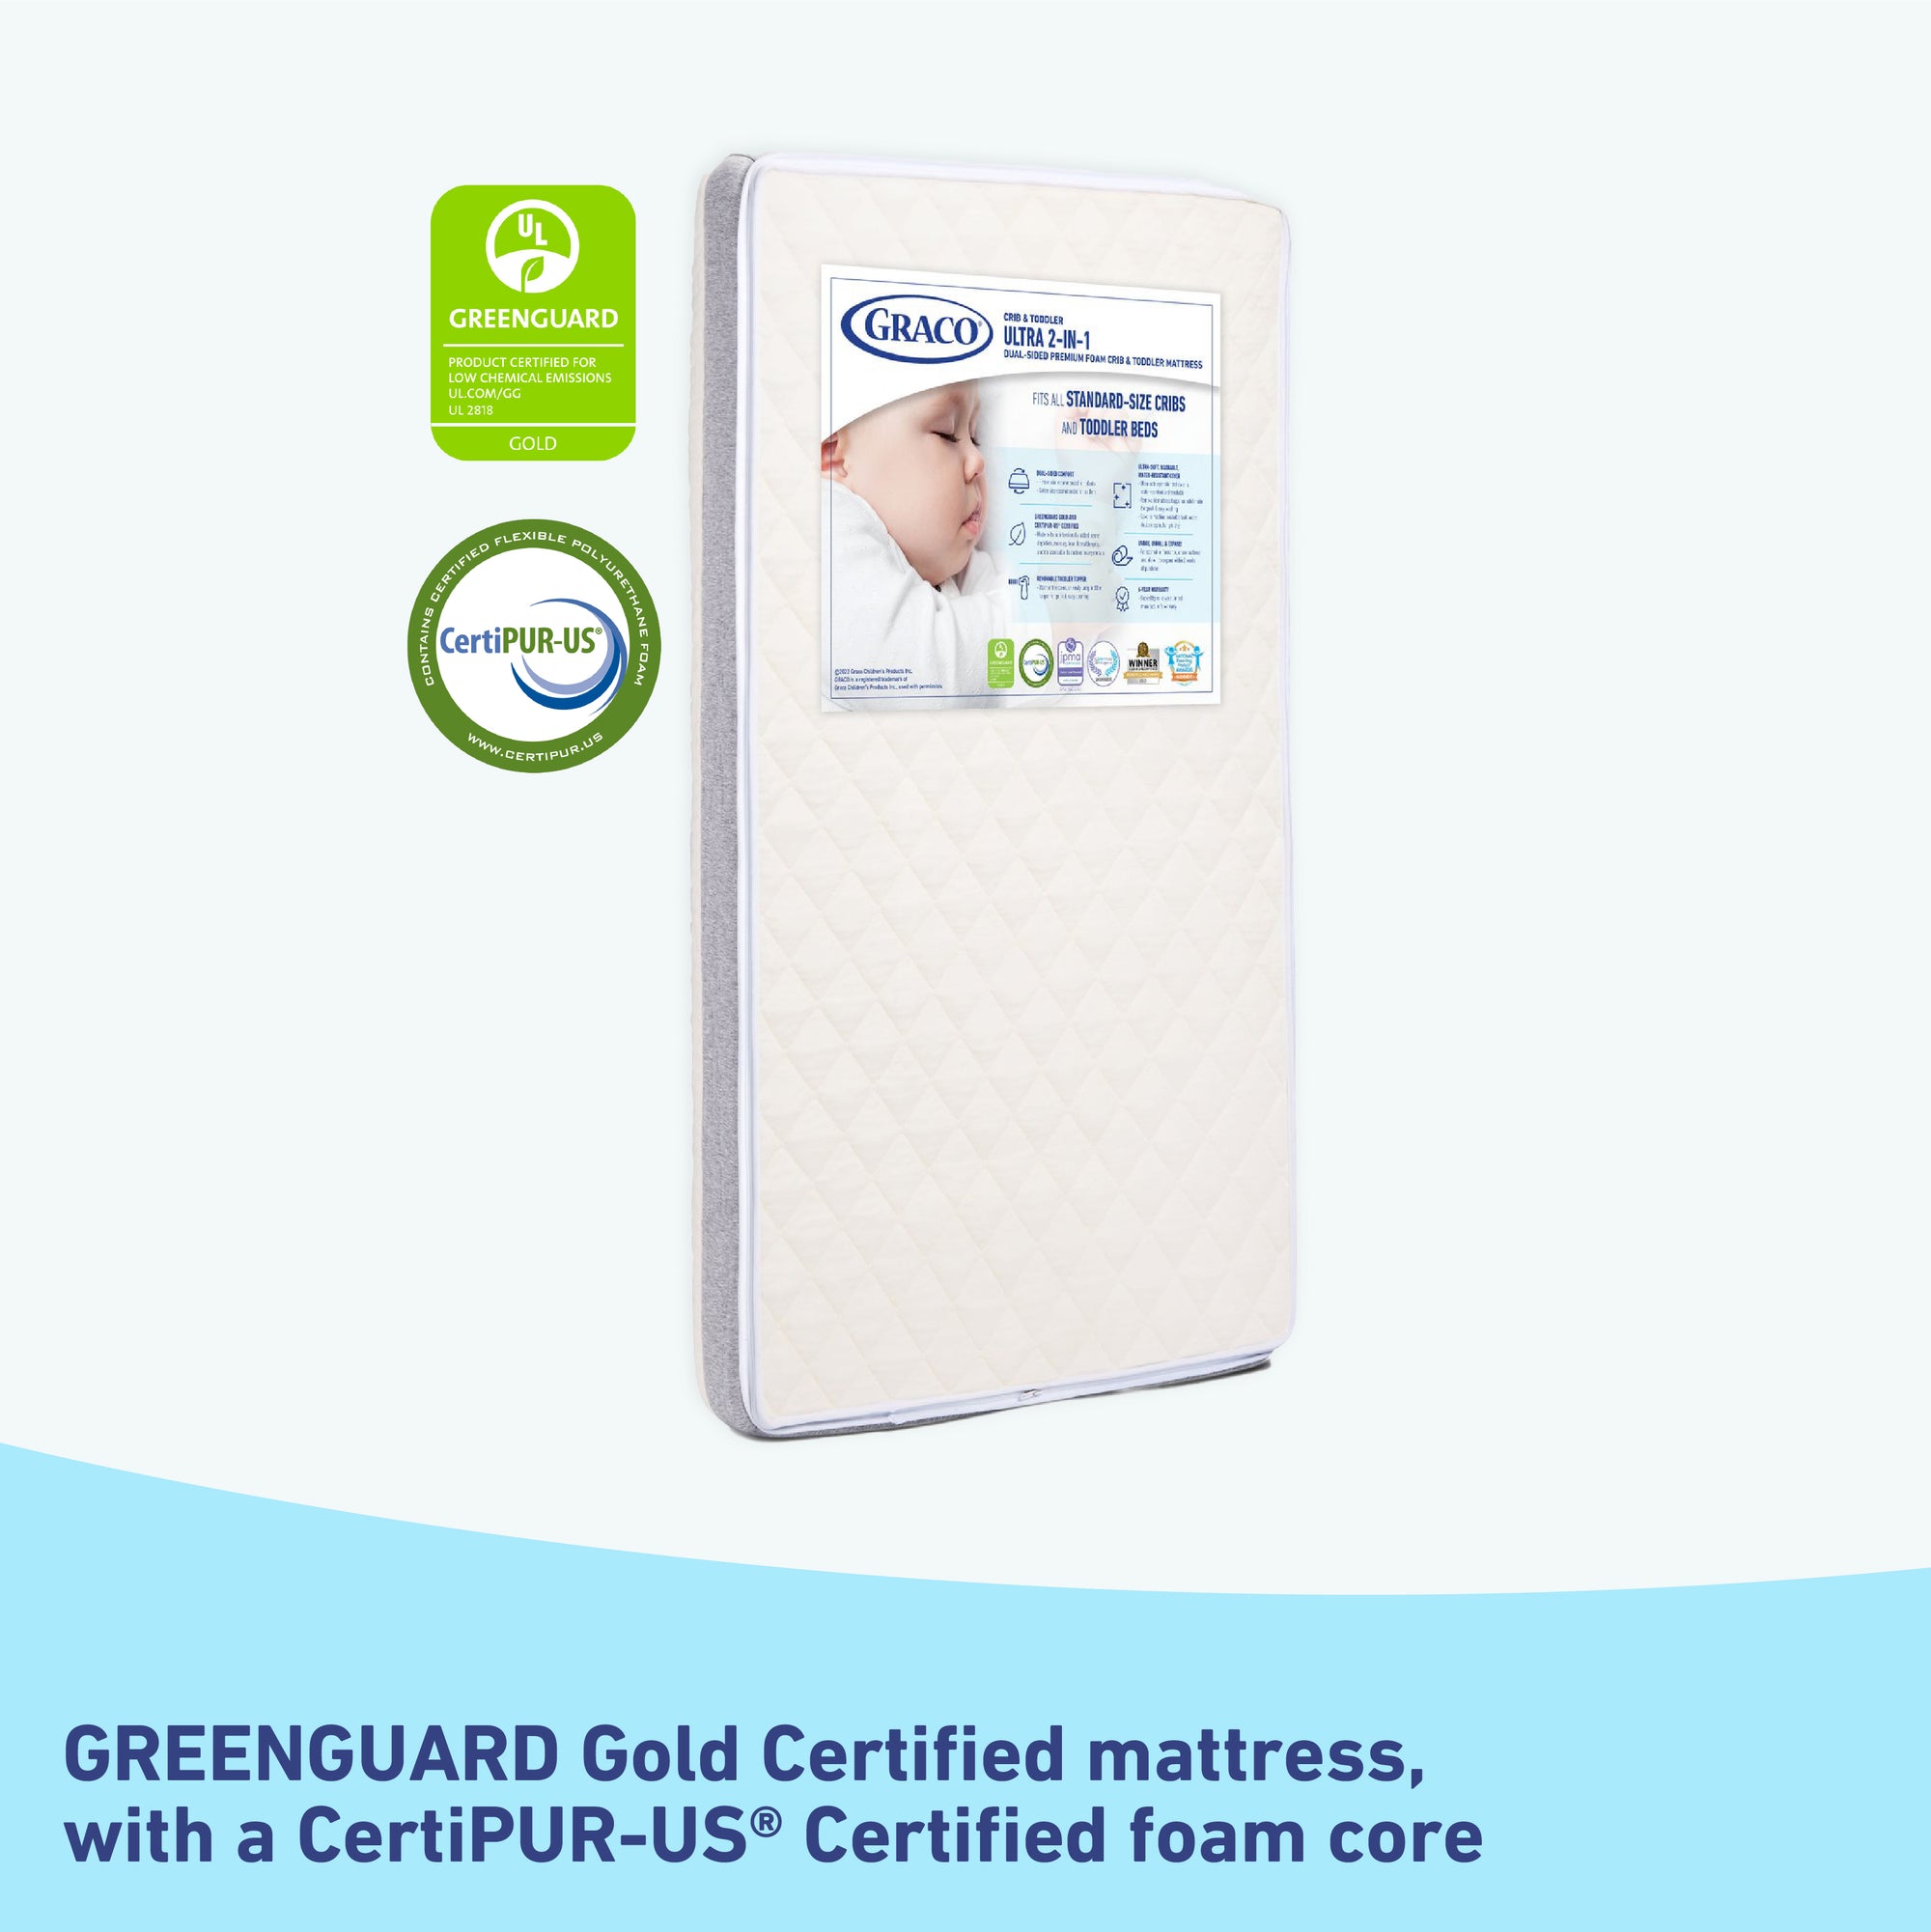 Graco® Ultra 2-in-1 Premium Dual-Sided Crib and Toddler Mattress –  Storkcraft